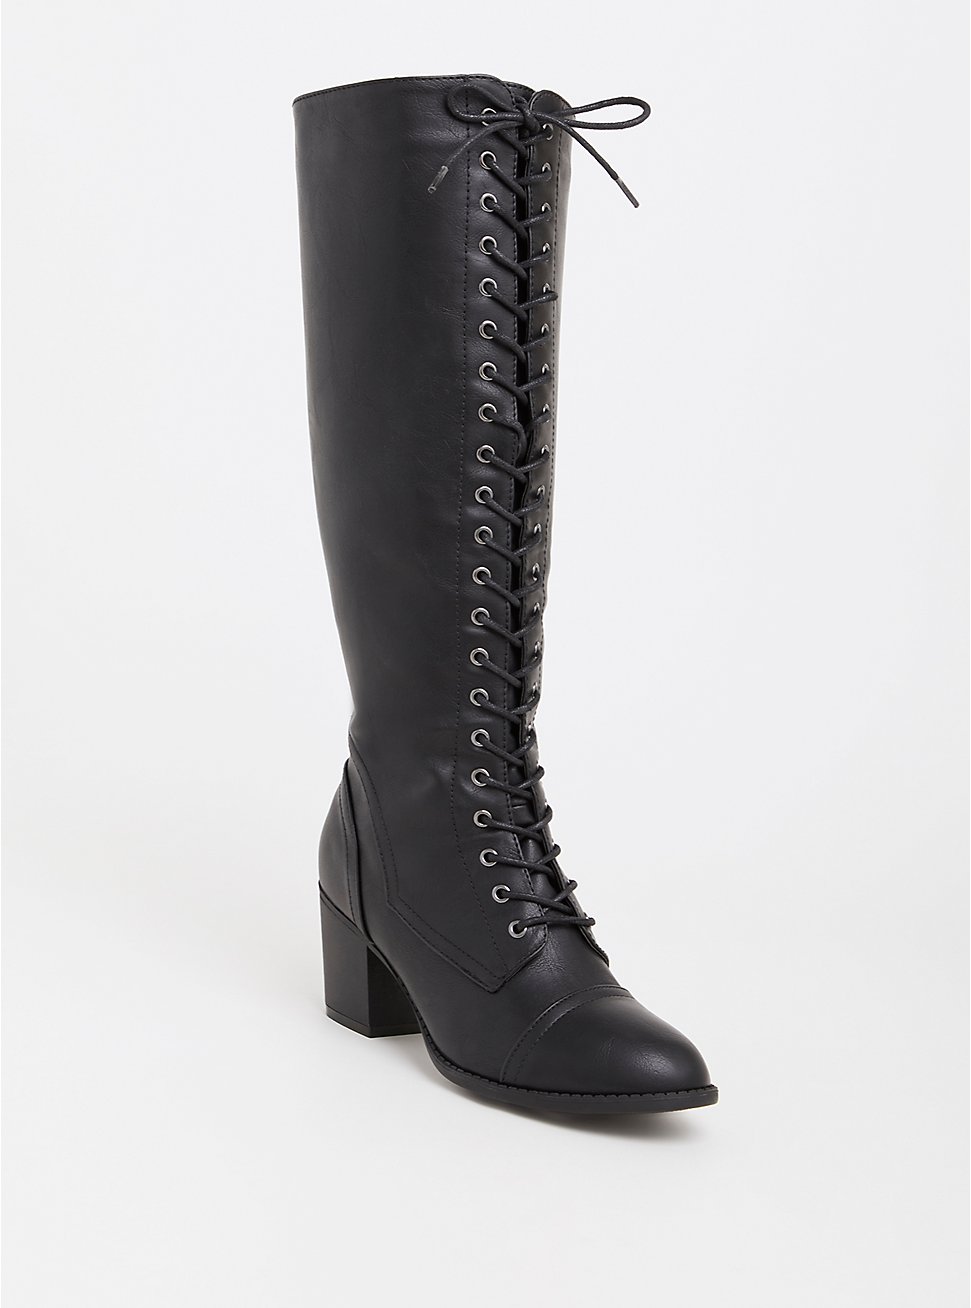 Plus Size - Black Lace-Up Knee Boot (WW & Wide To Extra Wide Calf) - Torrid